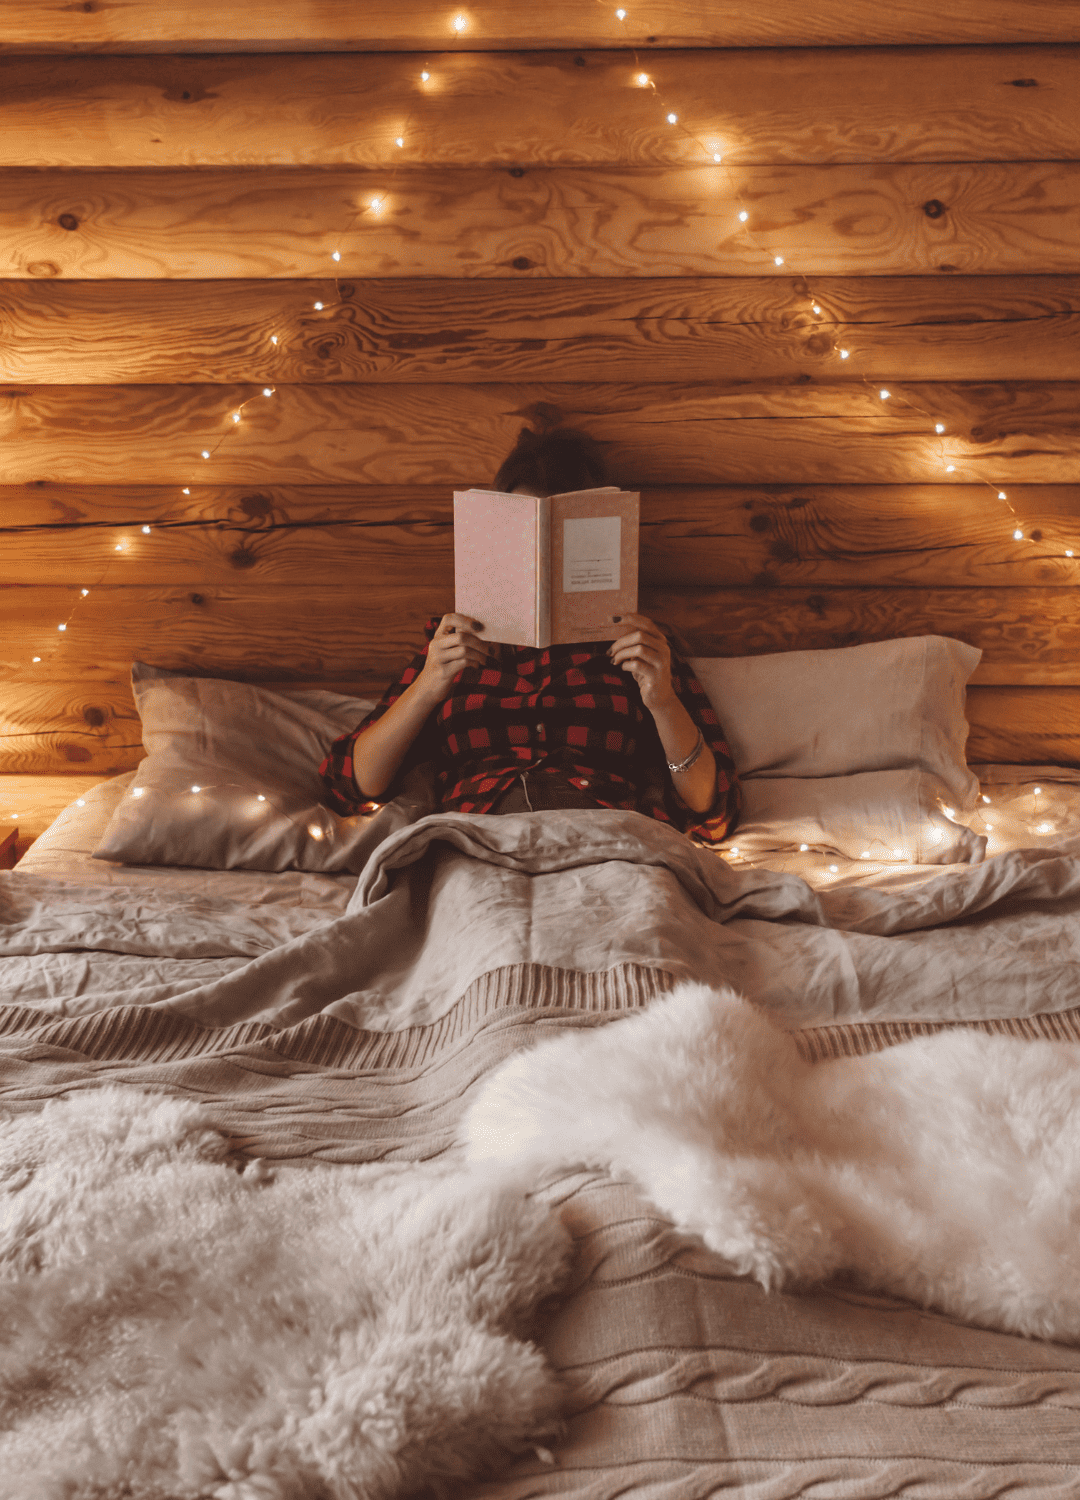 In bed with a book